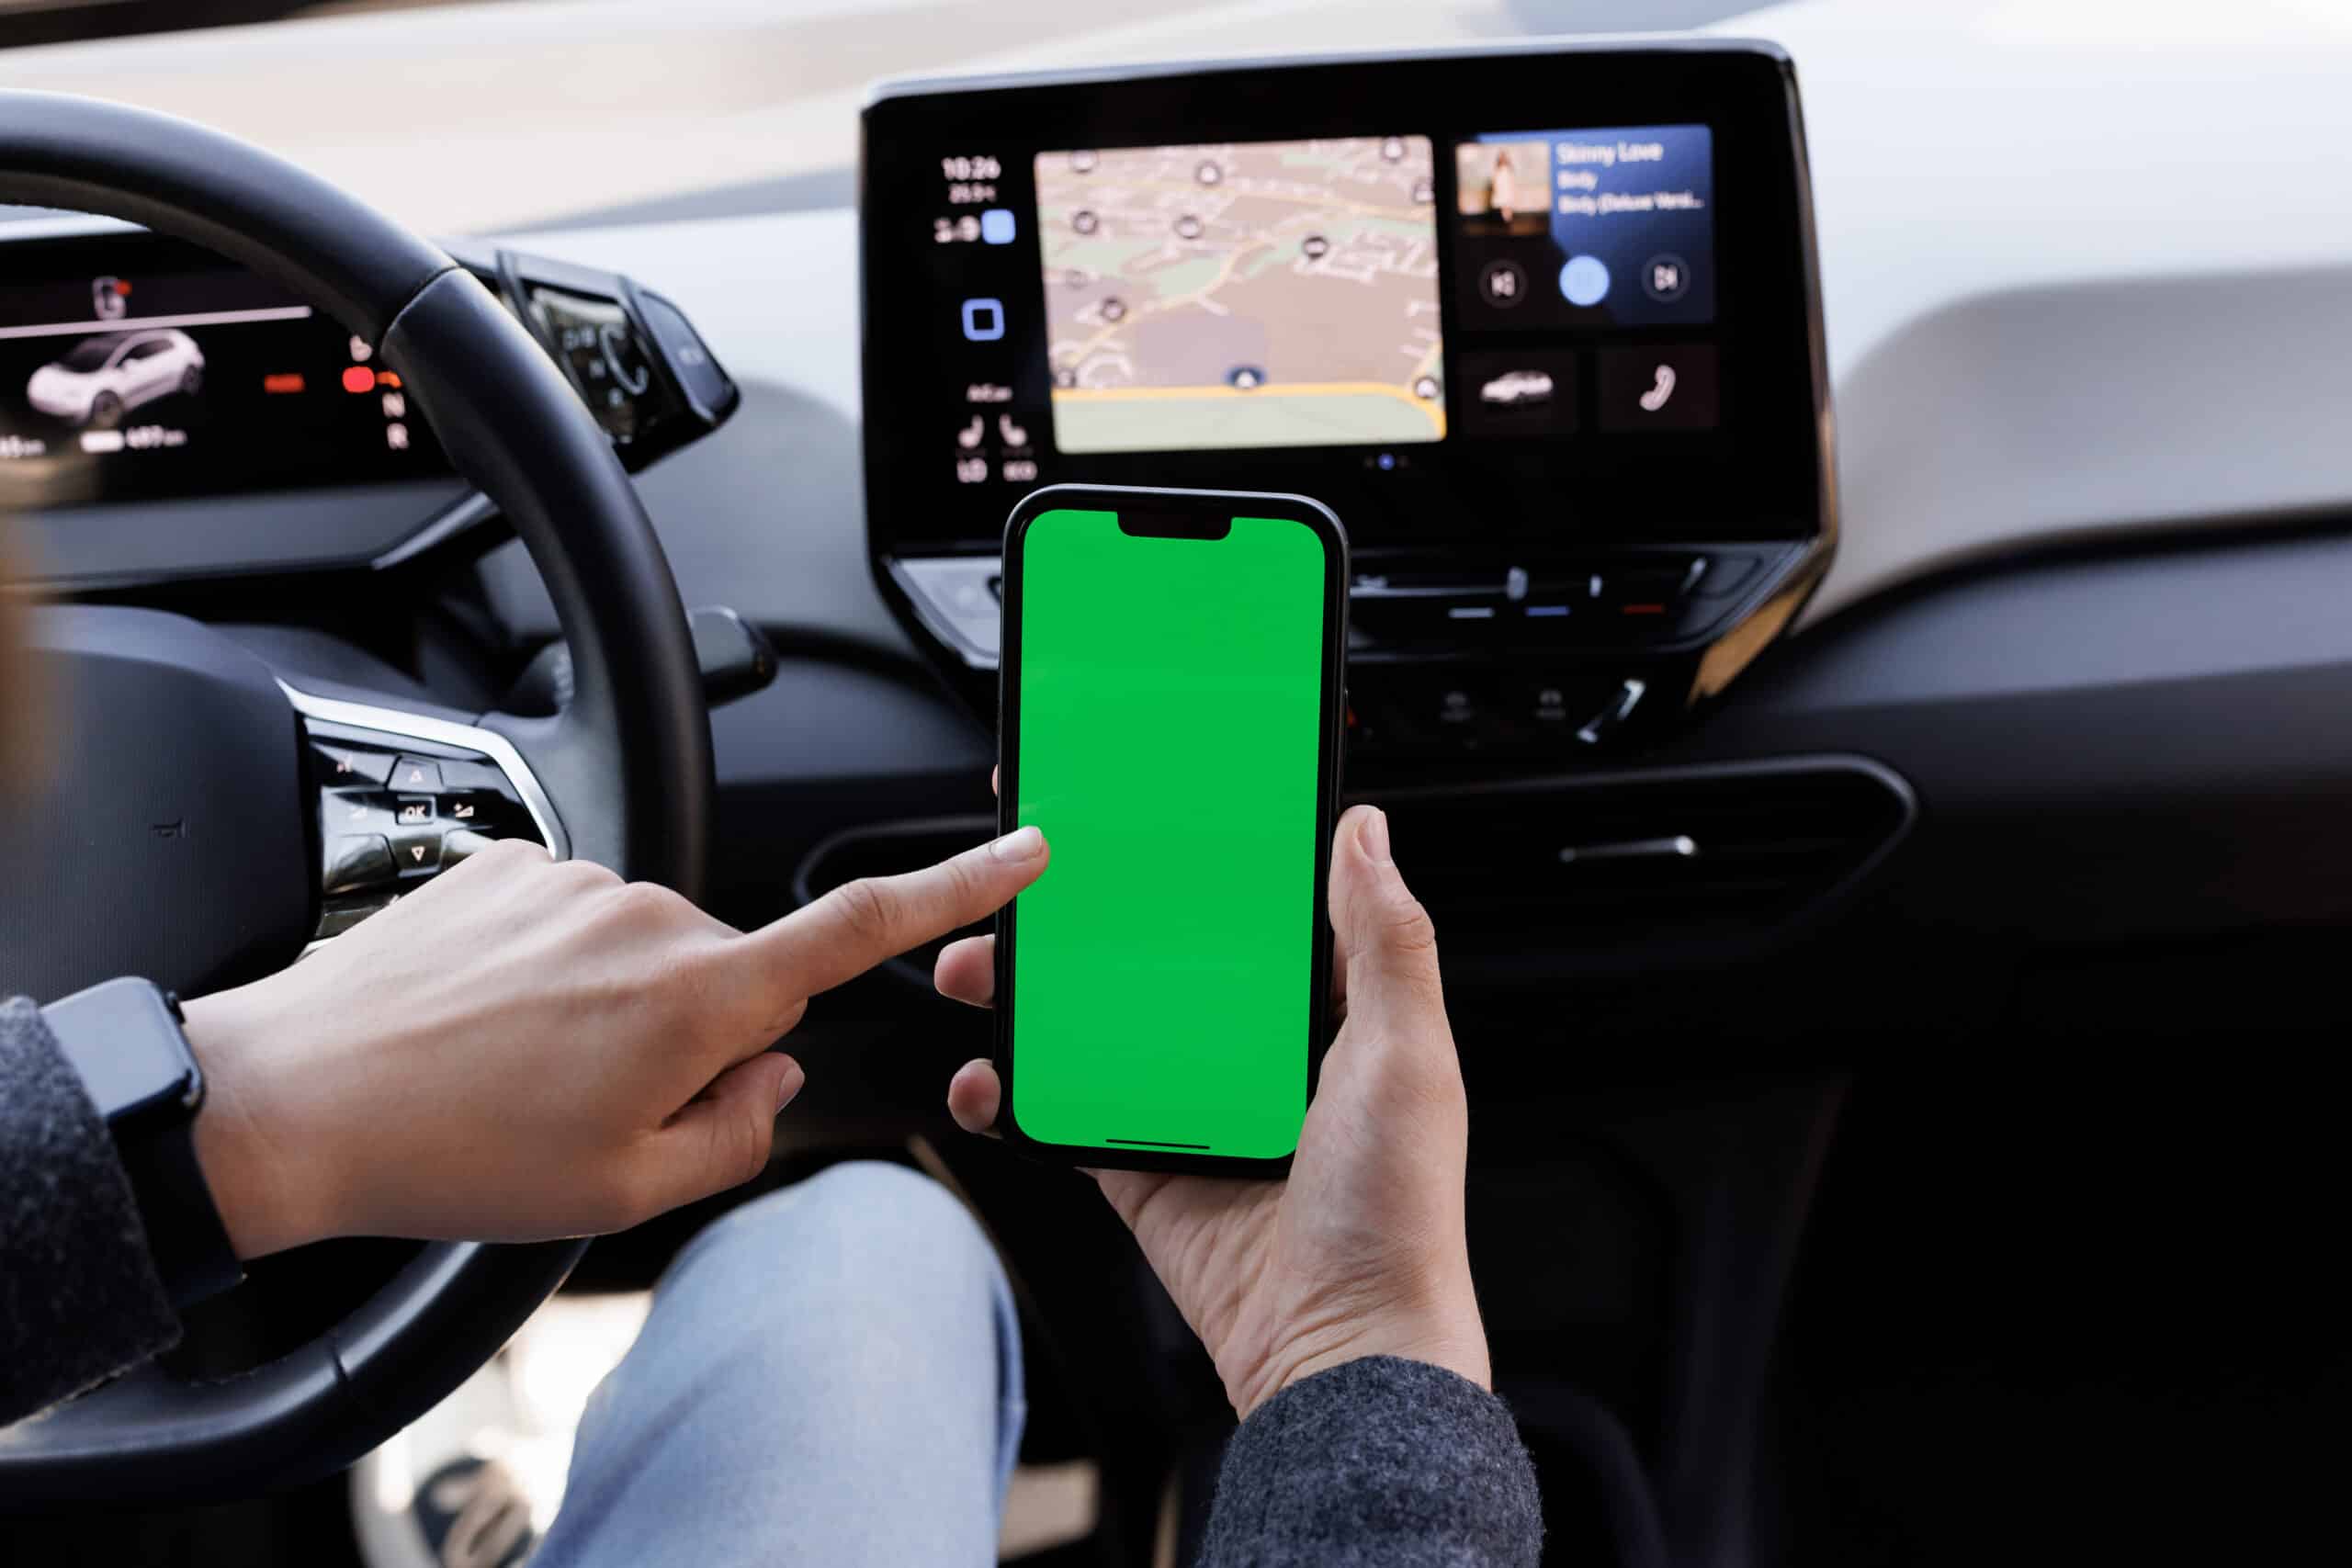 The green screen of the phone is chroma key in the car. Driver is sitting in the car and watching her smartphone with green screen at day. Man holding mobile phone on the background of a car interior